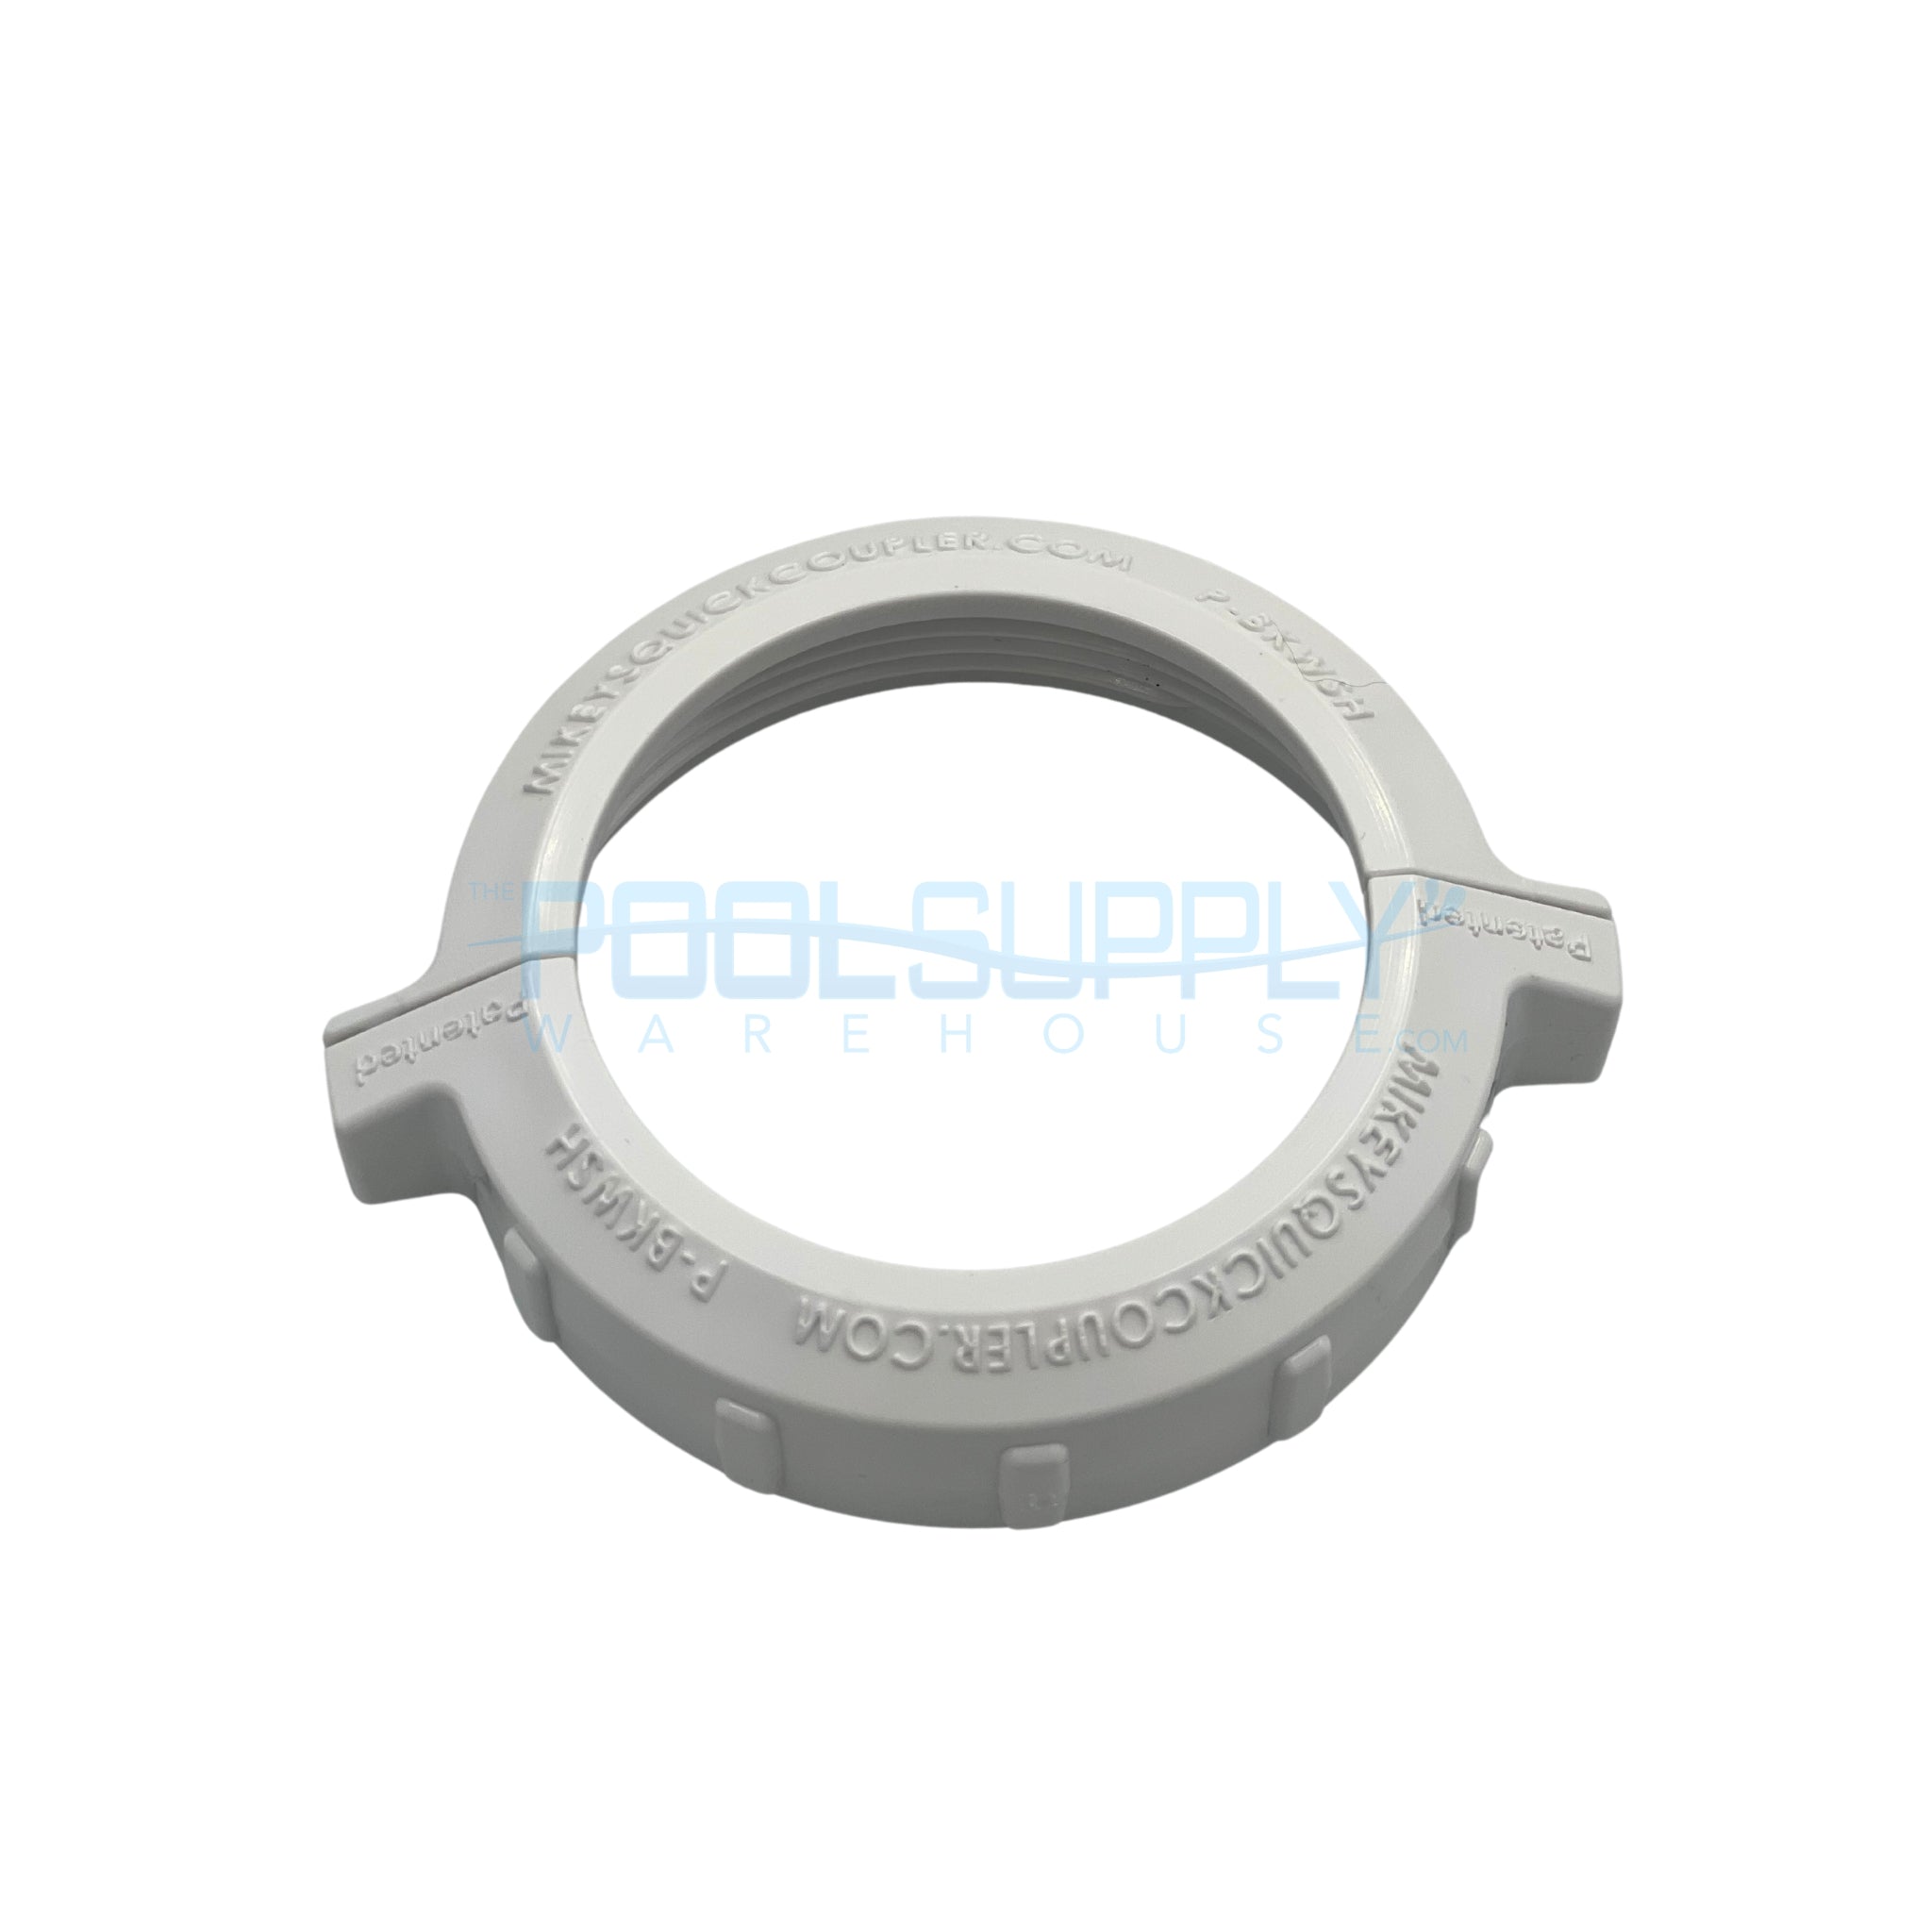 Mikeys Quick Coupler - P-BKWSH - The Pool Supply Warehouse